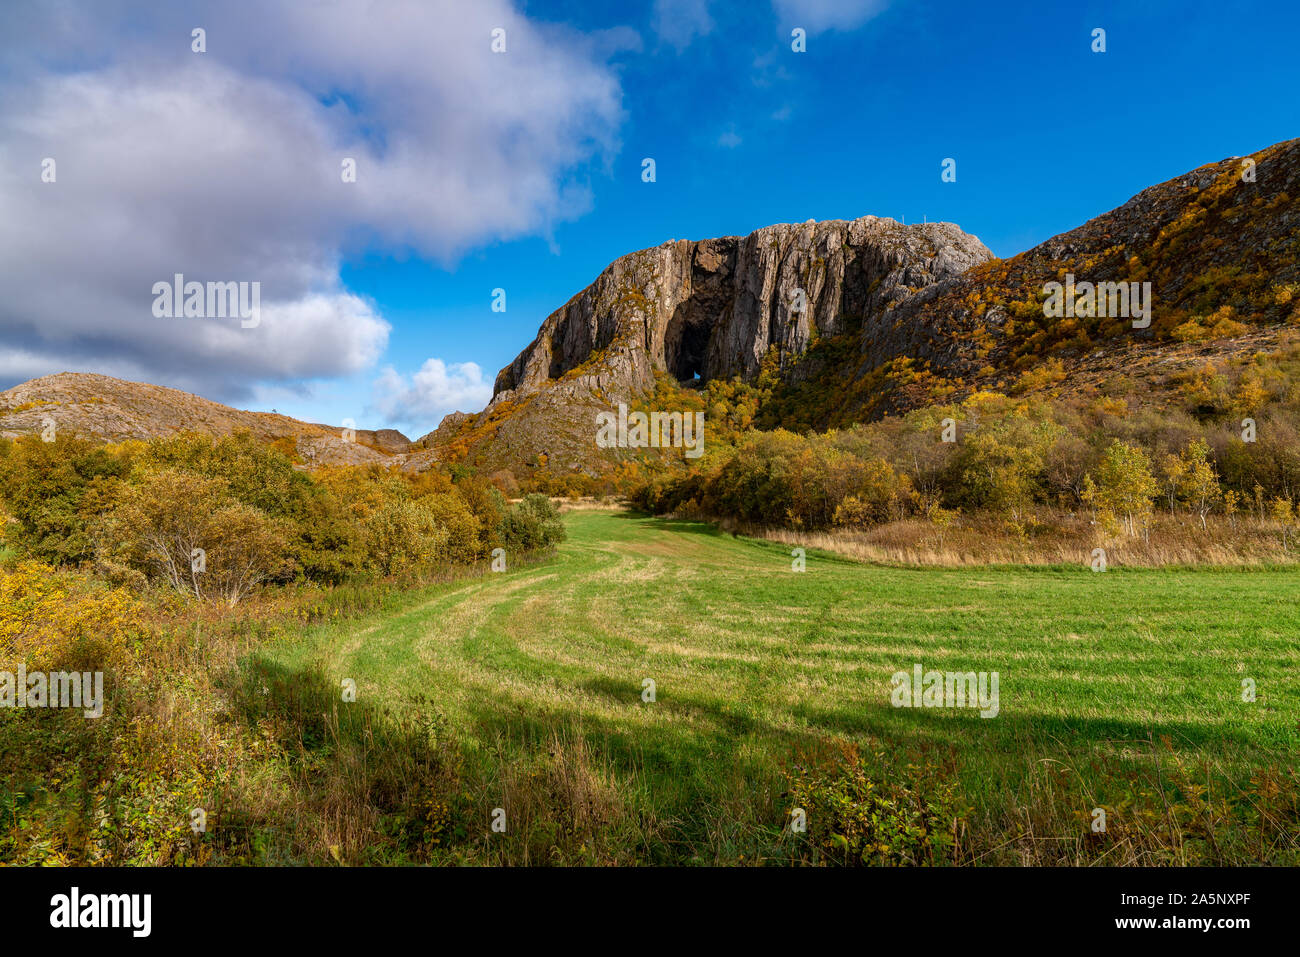 Farmland near the famous mountain with a hole, Torghatten, Helgeland, Northern Norway Stock Photo